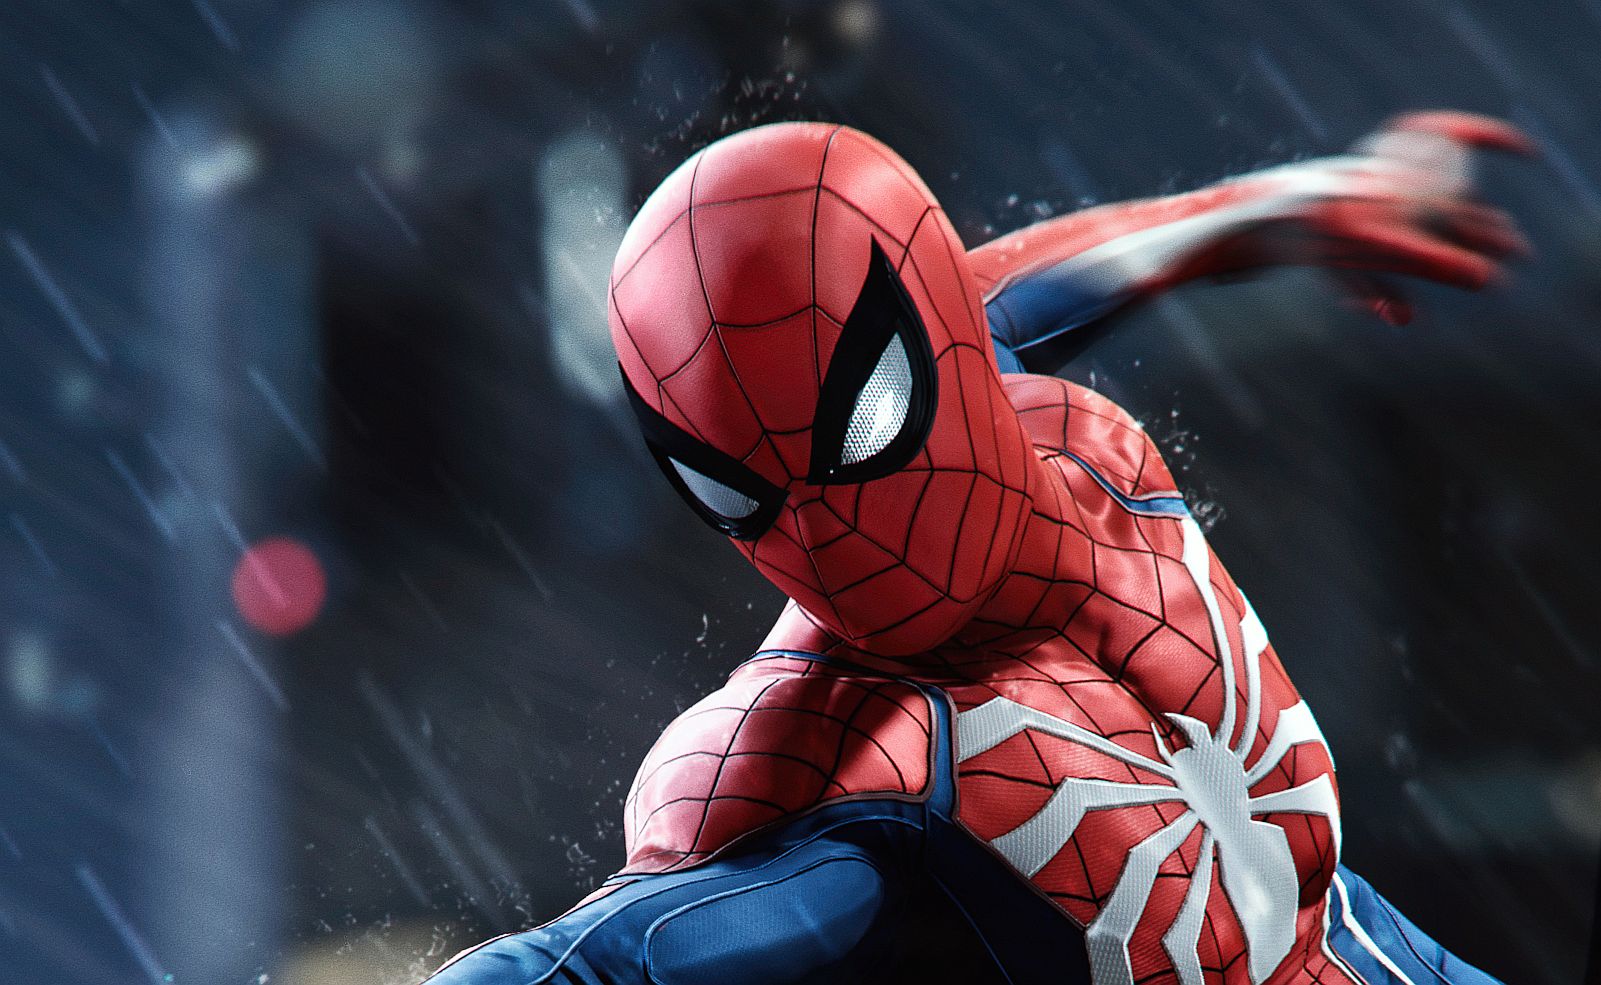 Image for Spider-Man 2 to release in 2021 - report